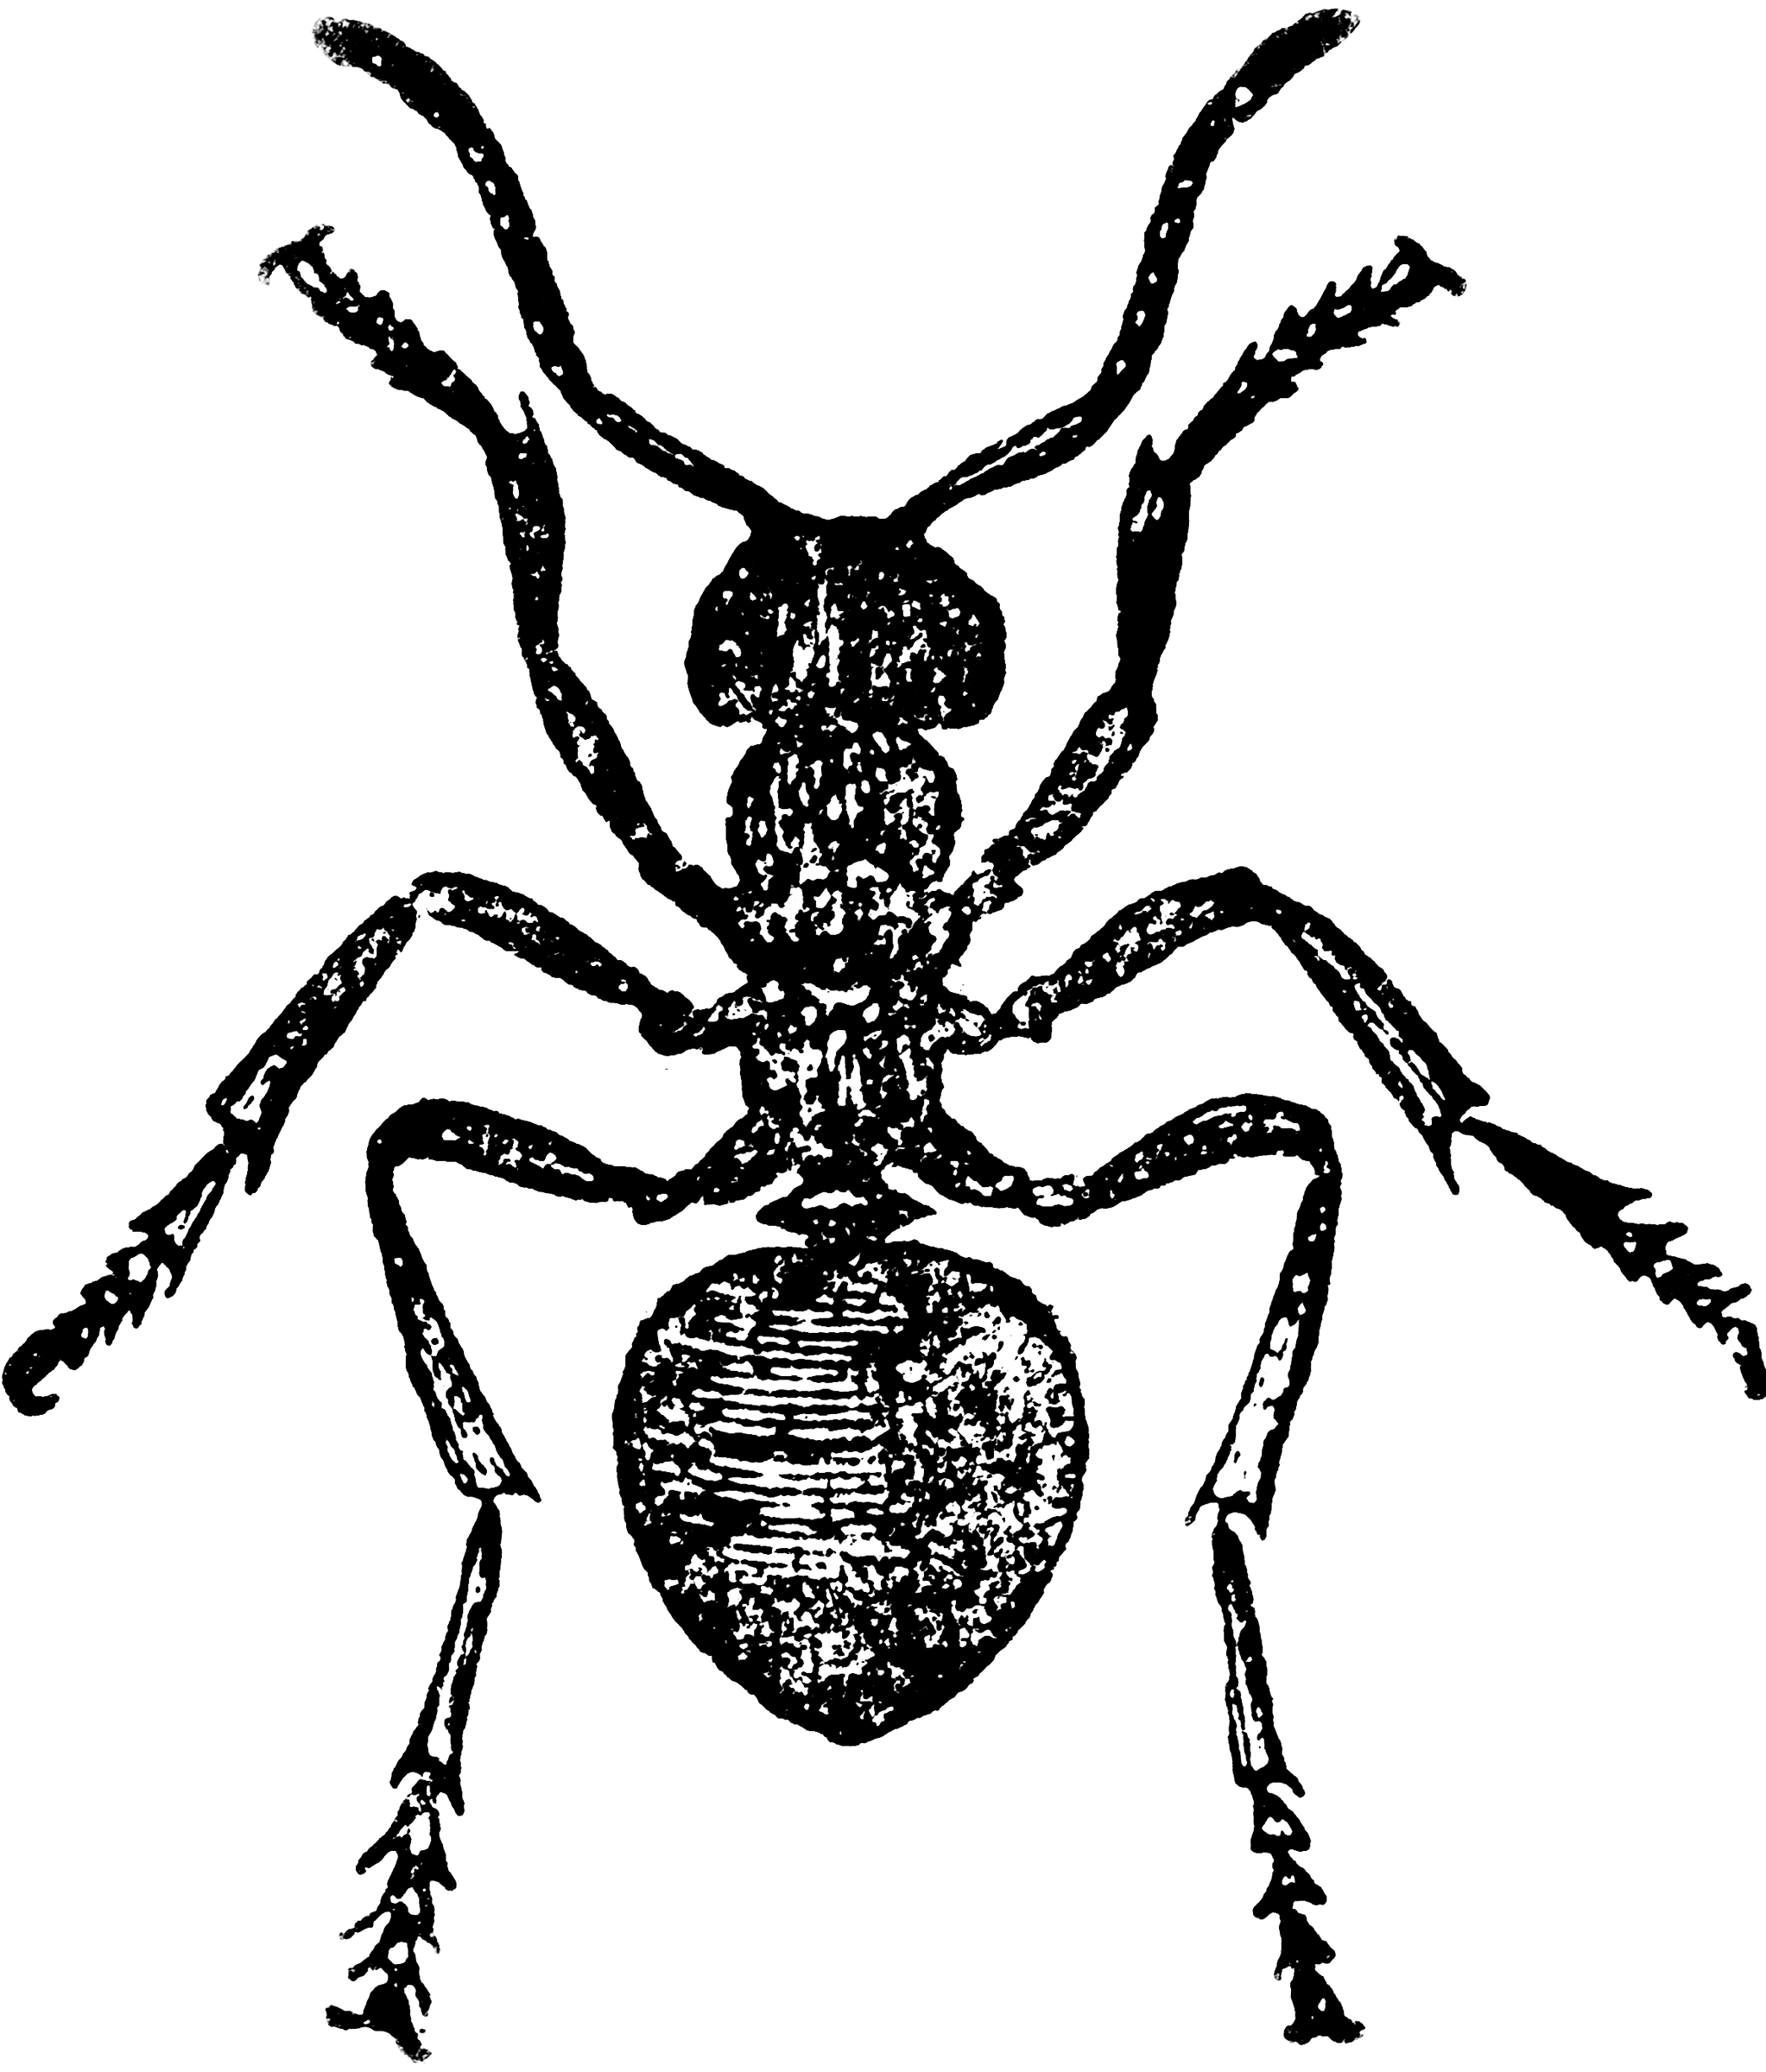 worker ant clipart - photo #13